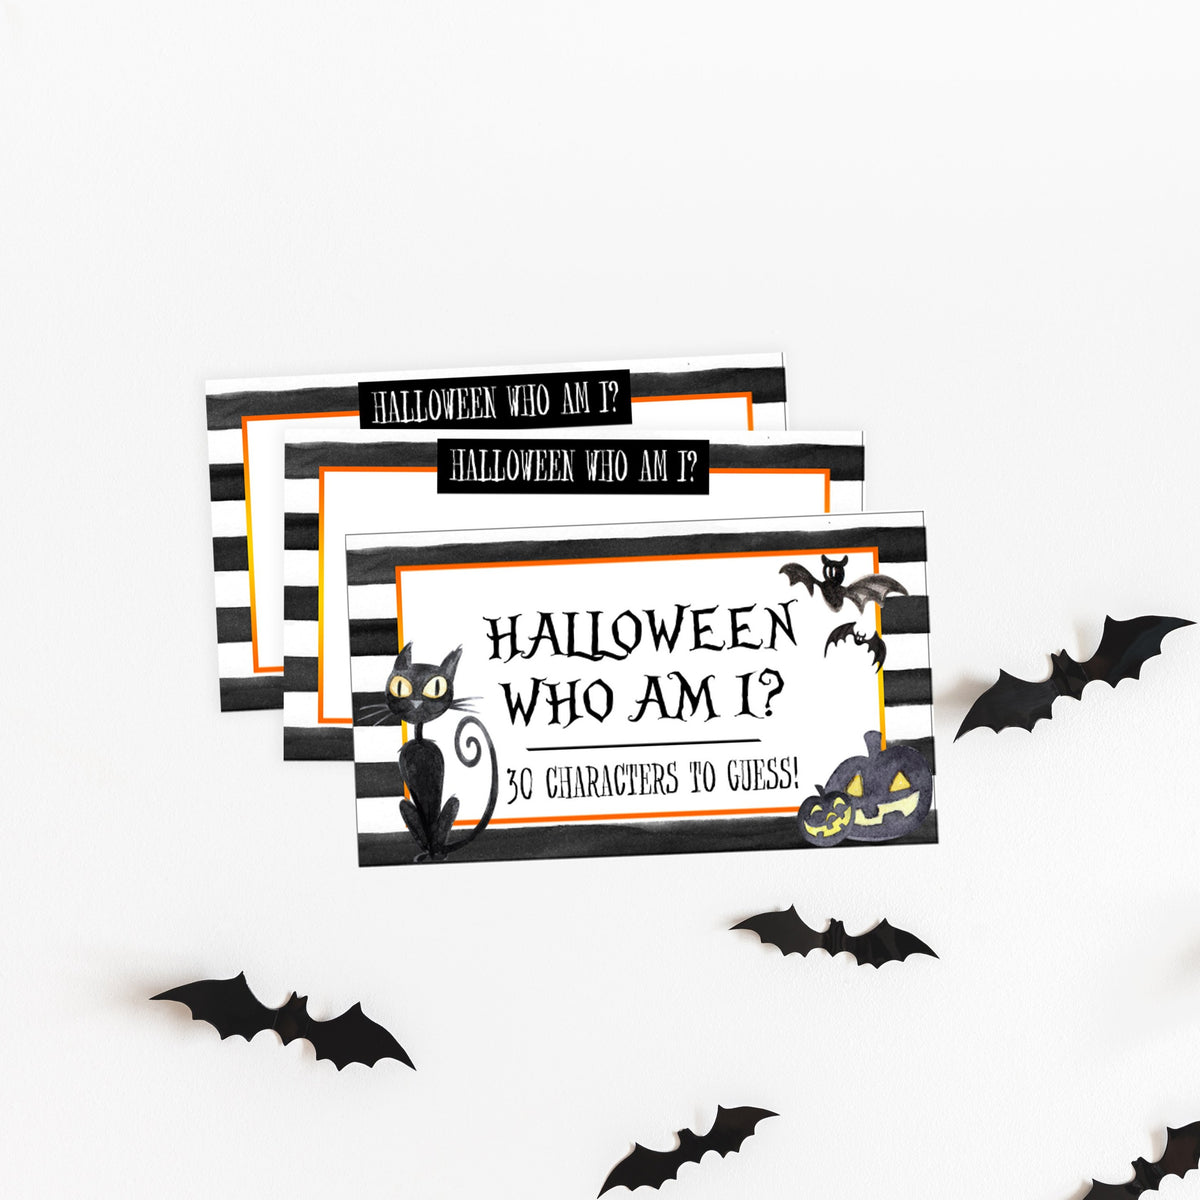 halloween who am I game, halloween party games, halloween games, fun halloween games, kids halloween games